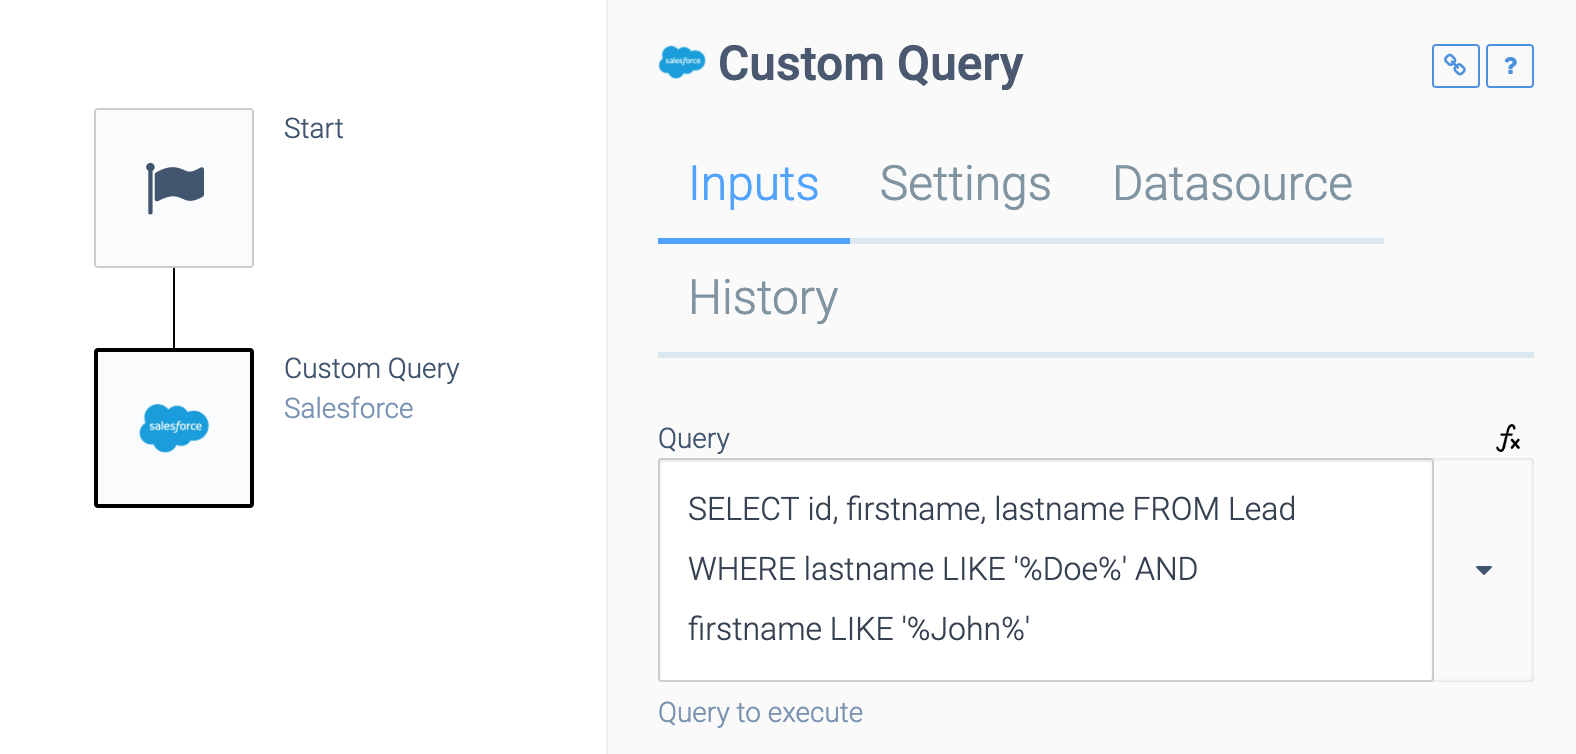 An example of a Custom Query block taking data from Salesforce.